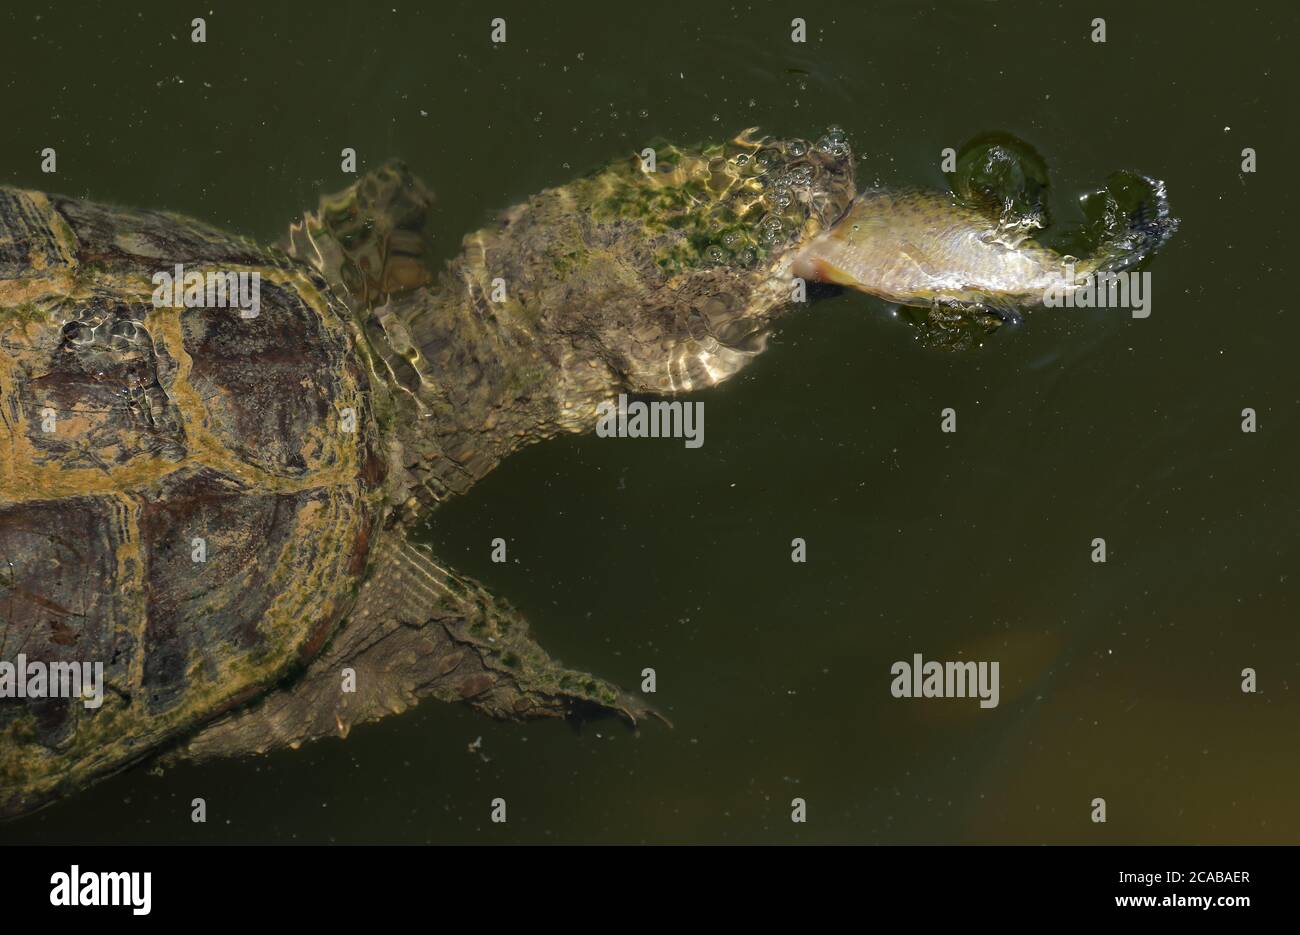 Snapping turtle, Chelydra serpentina, Maryland, feeding on white crappie Stock Photo